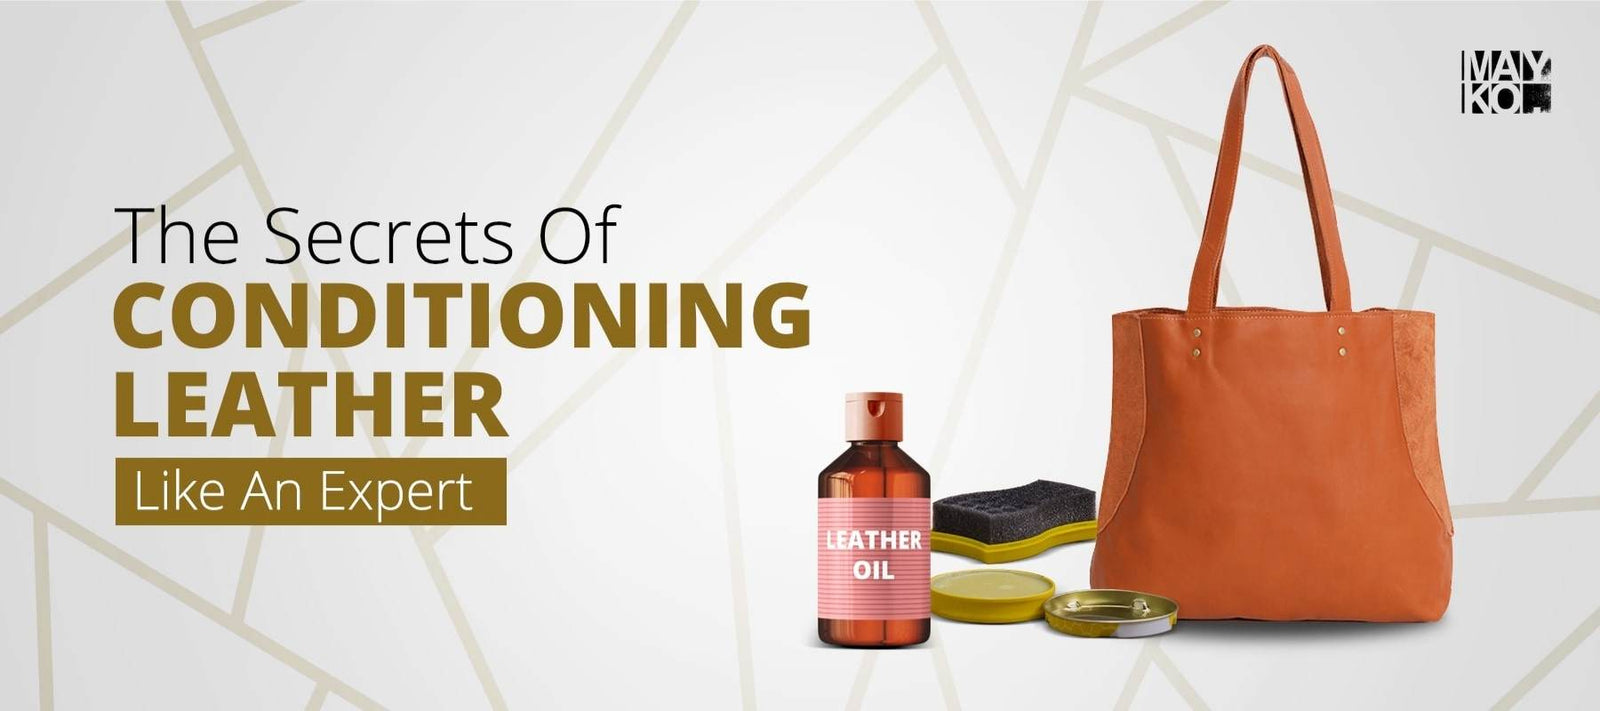 Tips for Cleaning That Stinky Leather Bag from Overseas - Fly&Dine